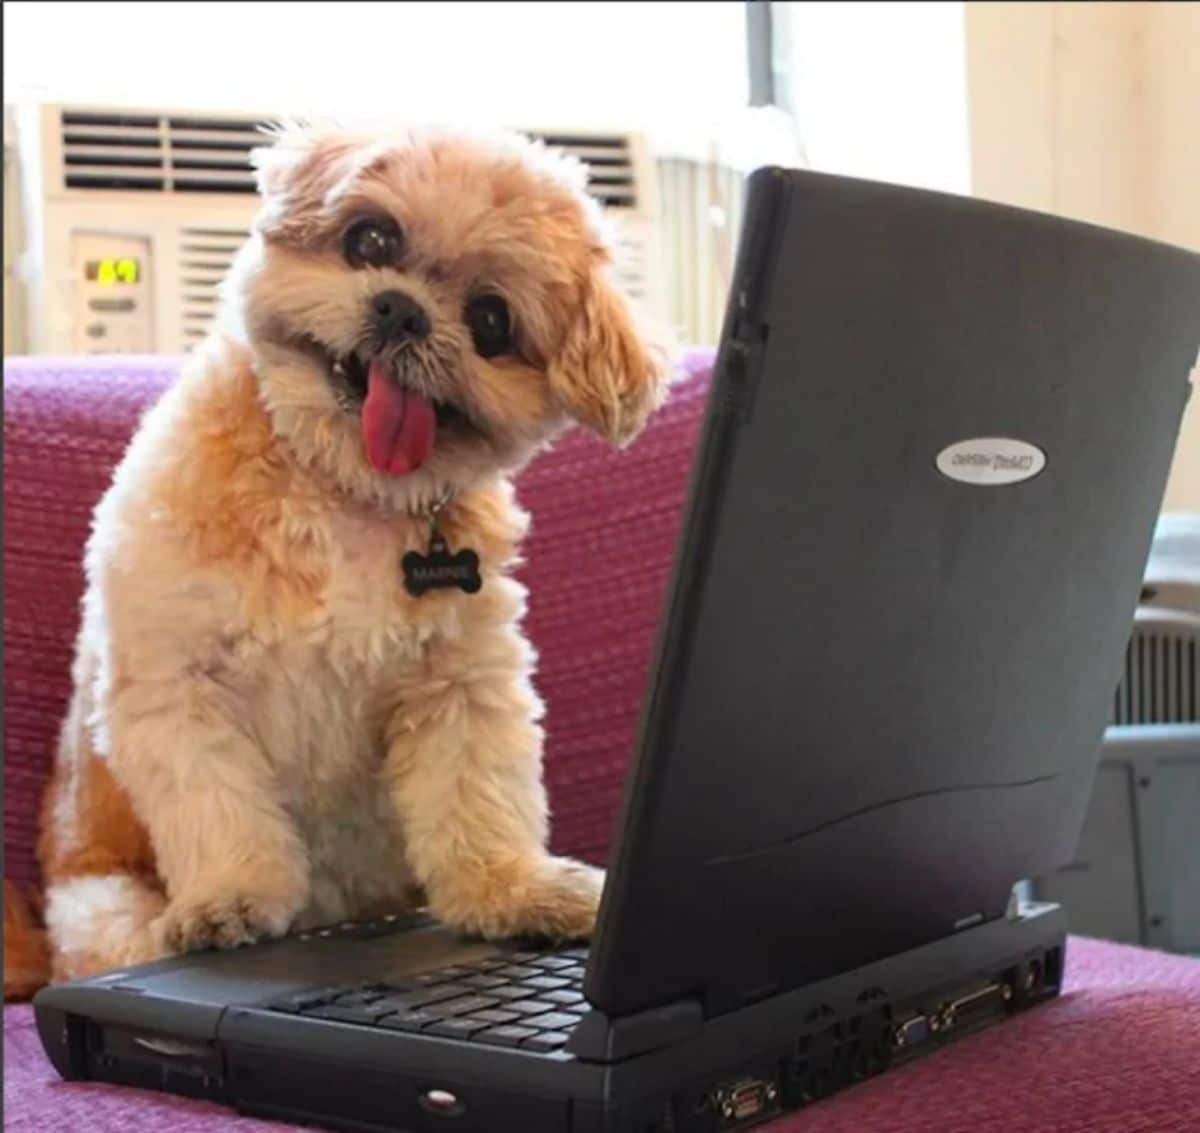 brown and white shi tzu with the tongue out standing over a black laptop